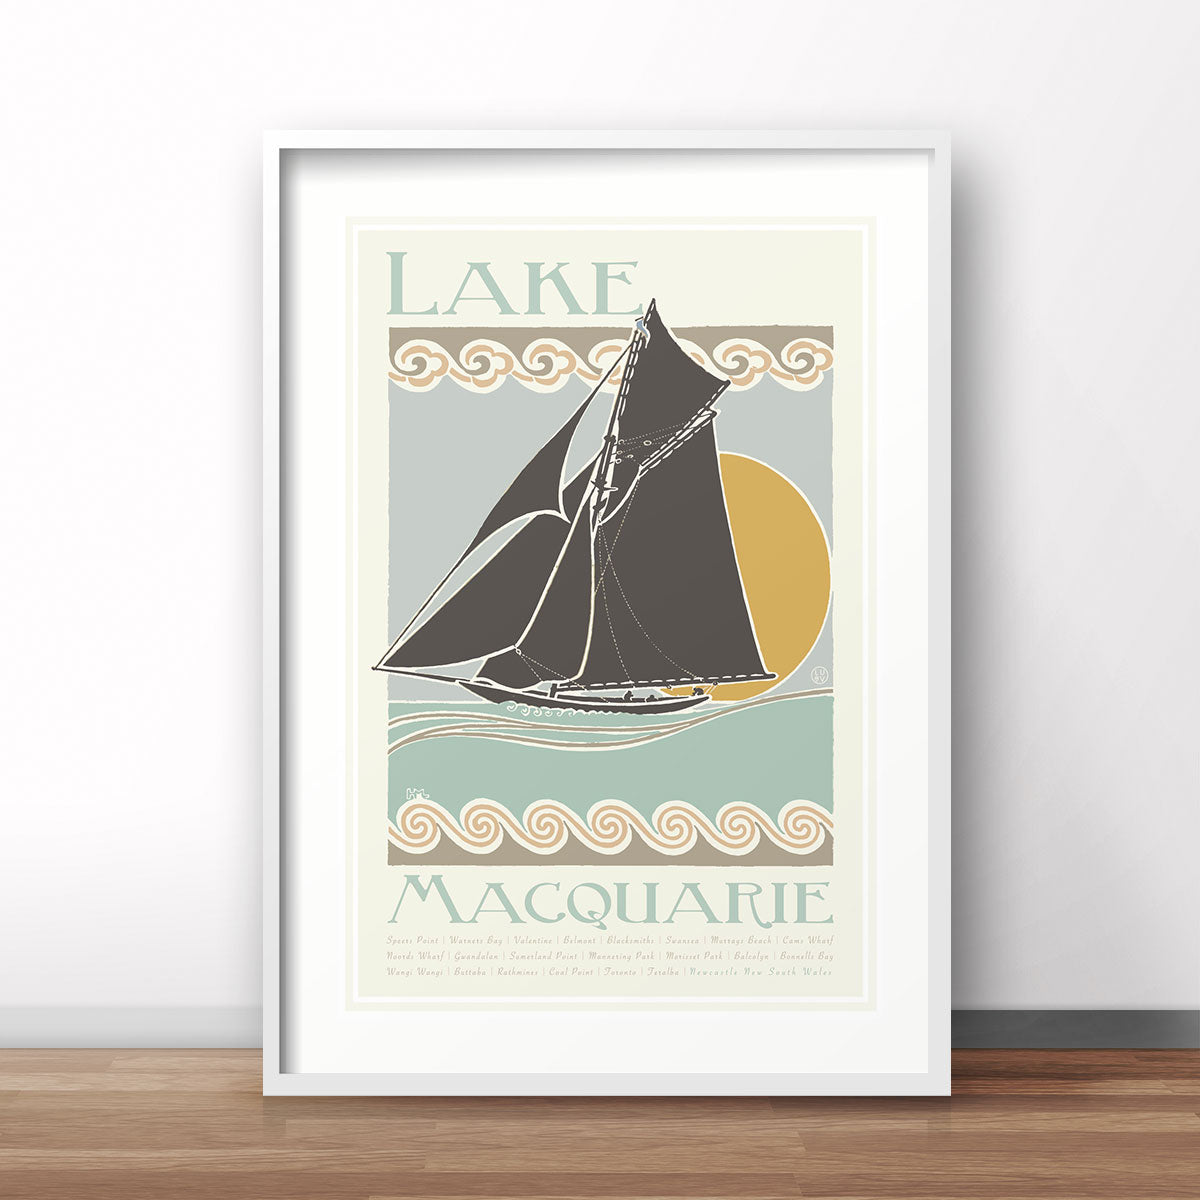 Lake Macquarie retro vintage poster from Places We Luv